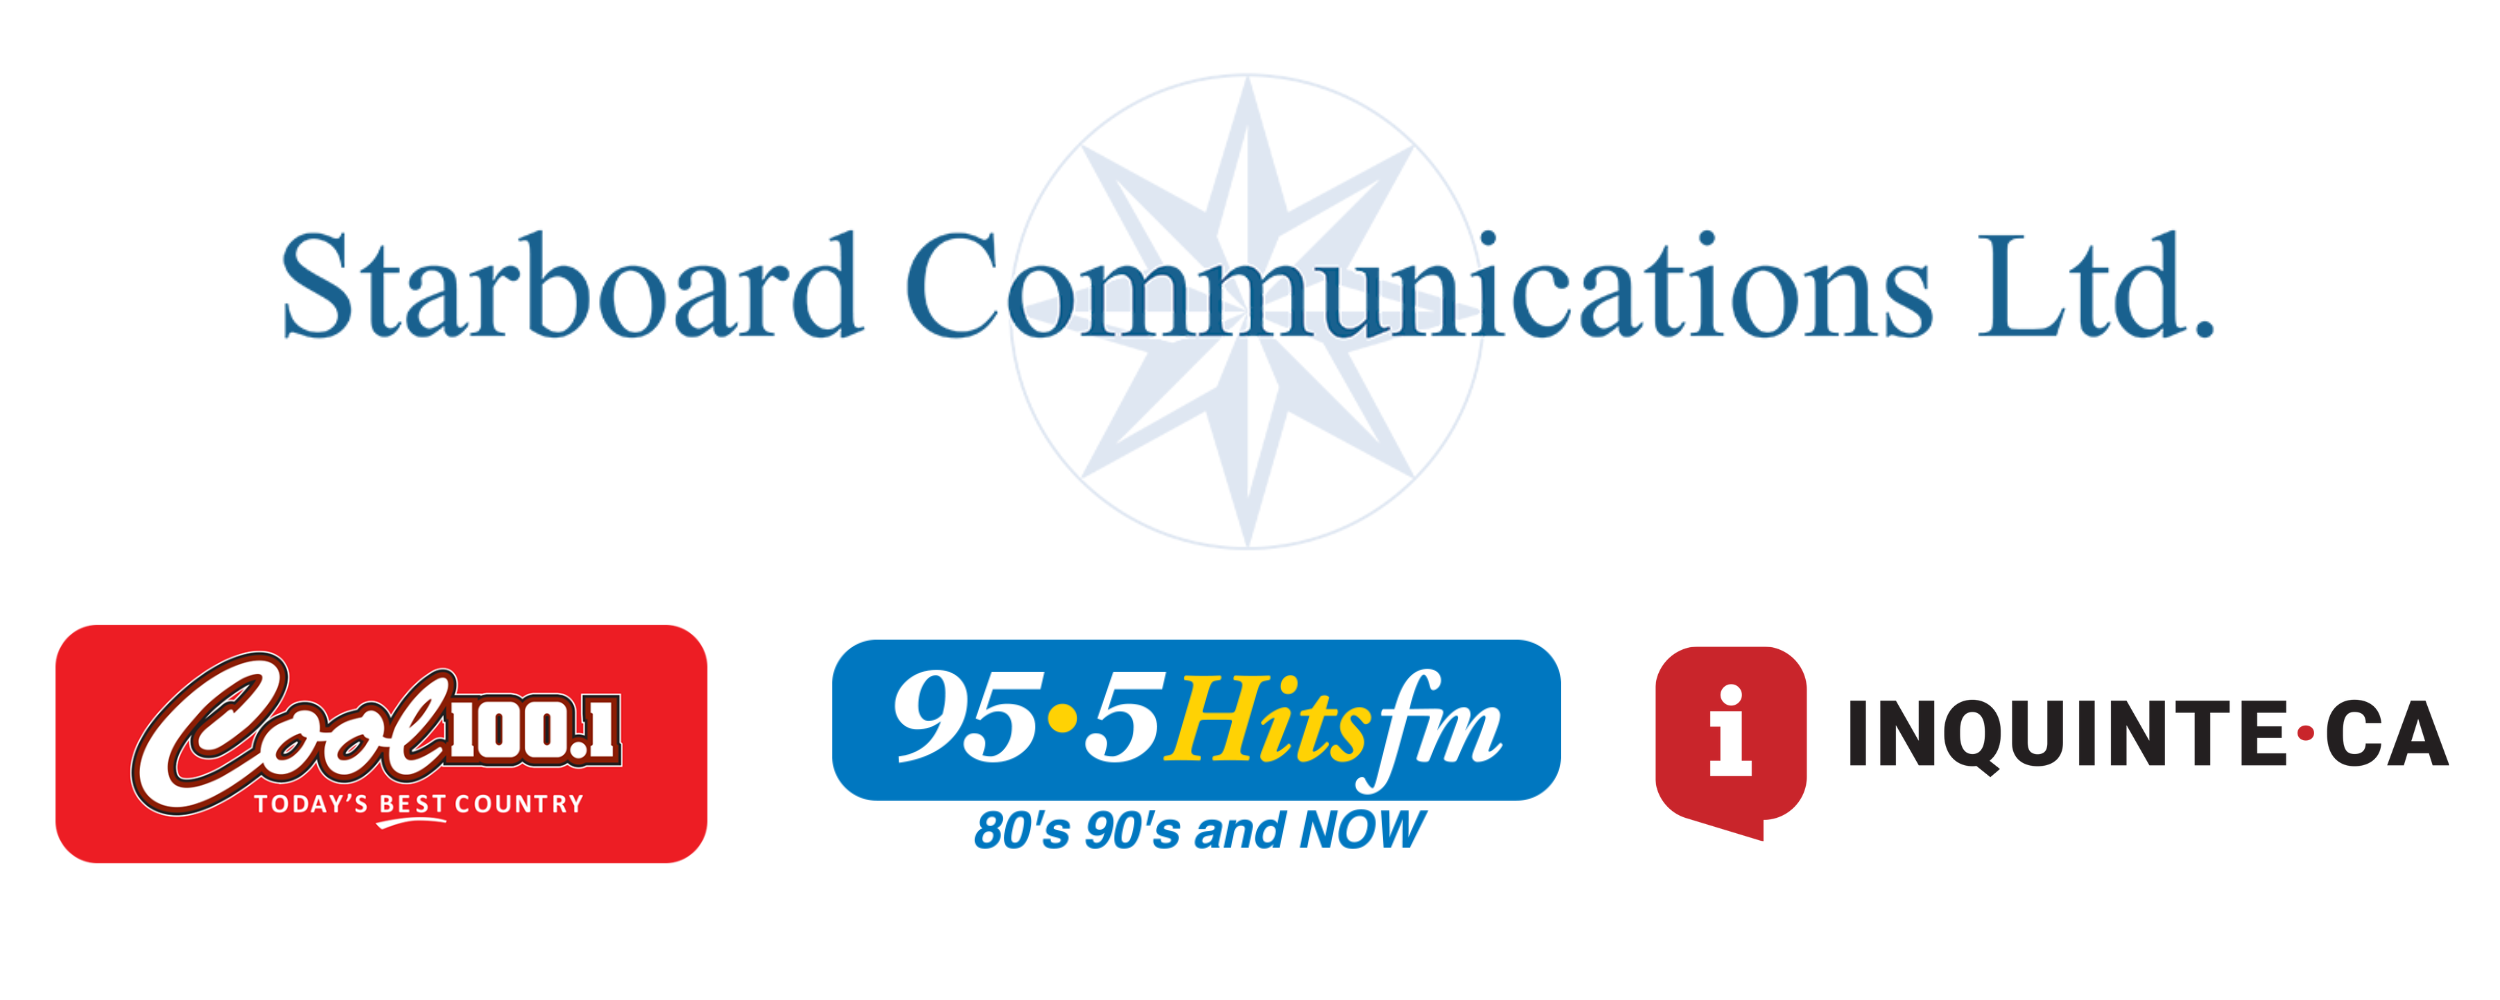 Starboard Communications 